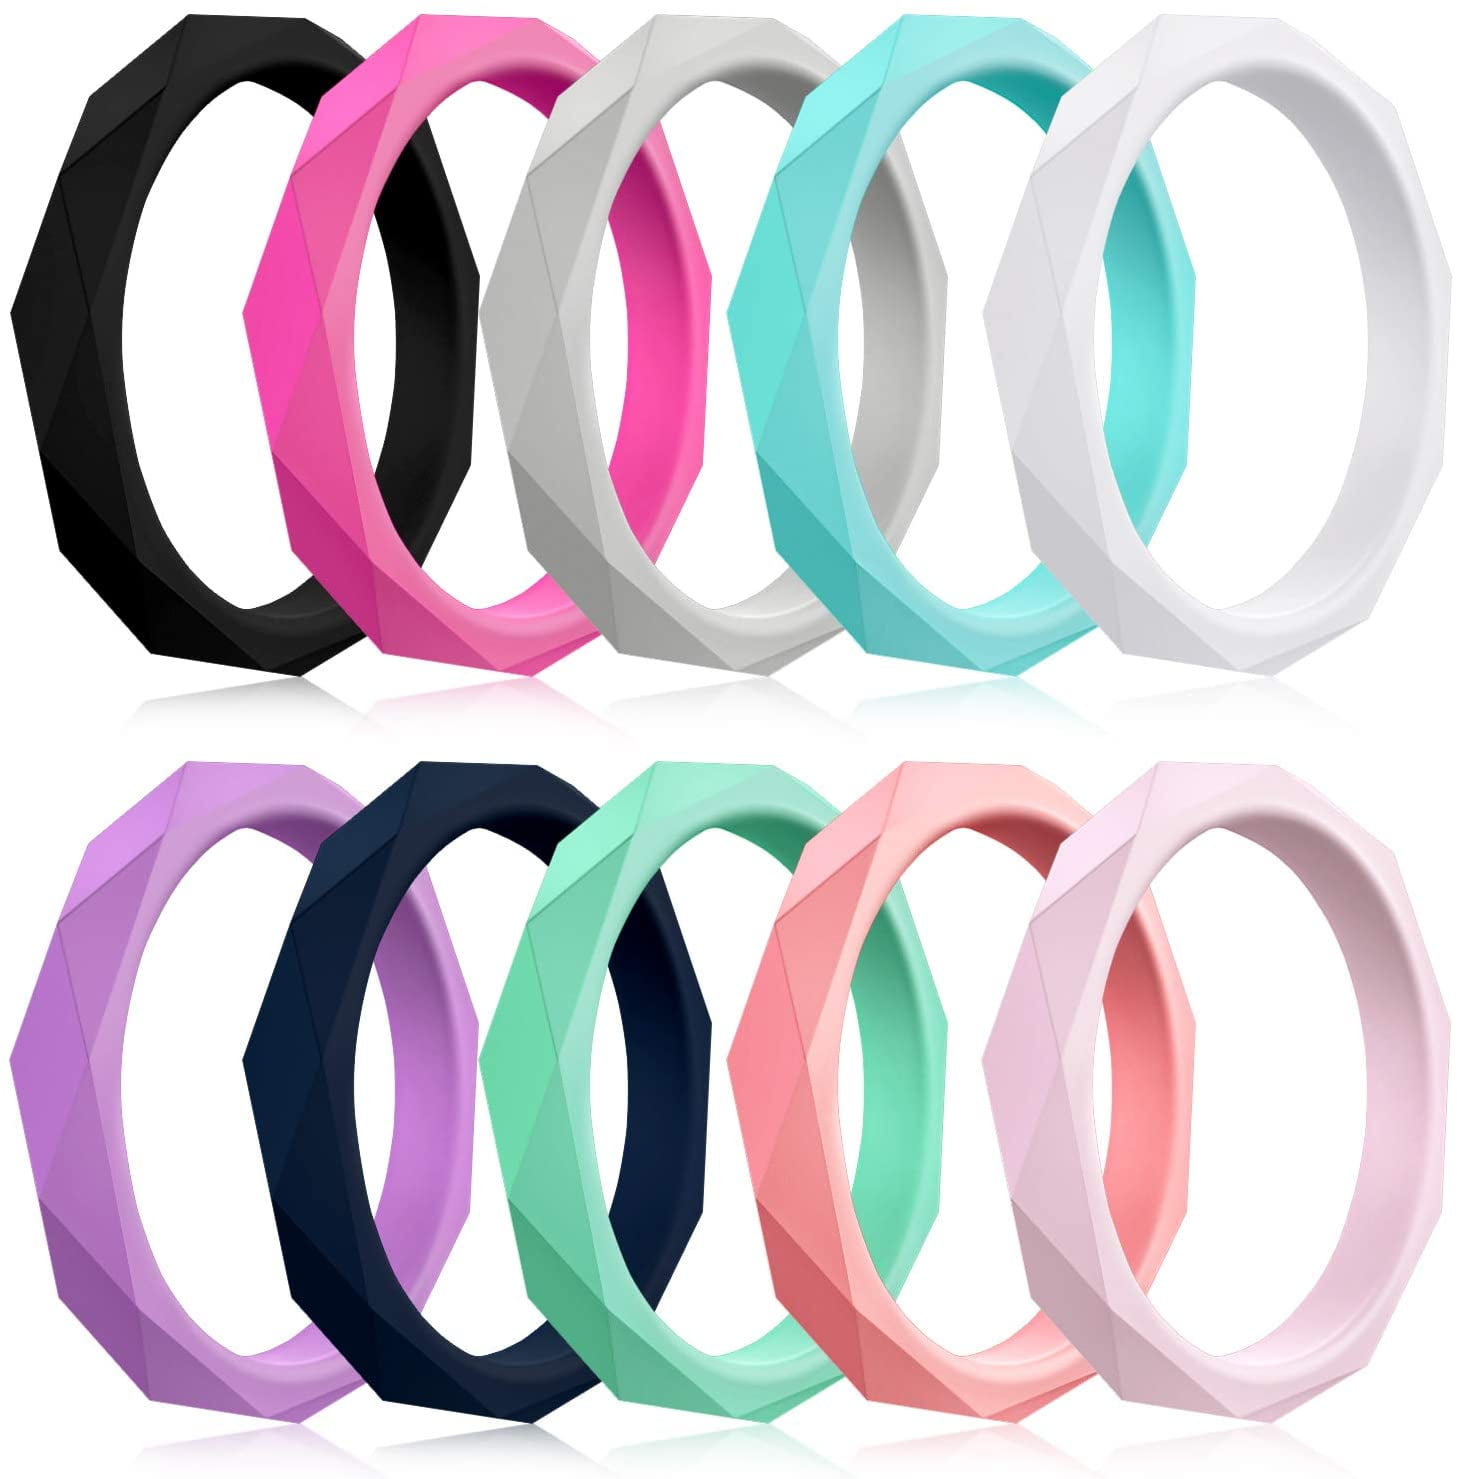 10 Pack Silicone Wedding Ring For Women Mokani Thin And Braided Rubber Band Cb755763 78a8 4ae9 86b3 Bdf87cfbfe18.be96e0e37c2f387363b99411a6d21abc 